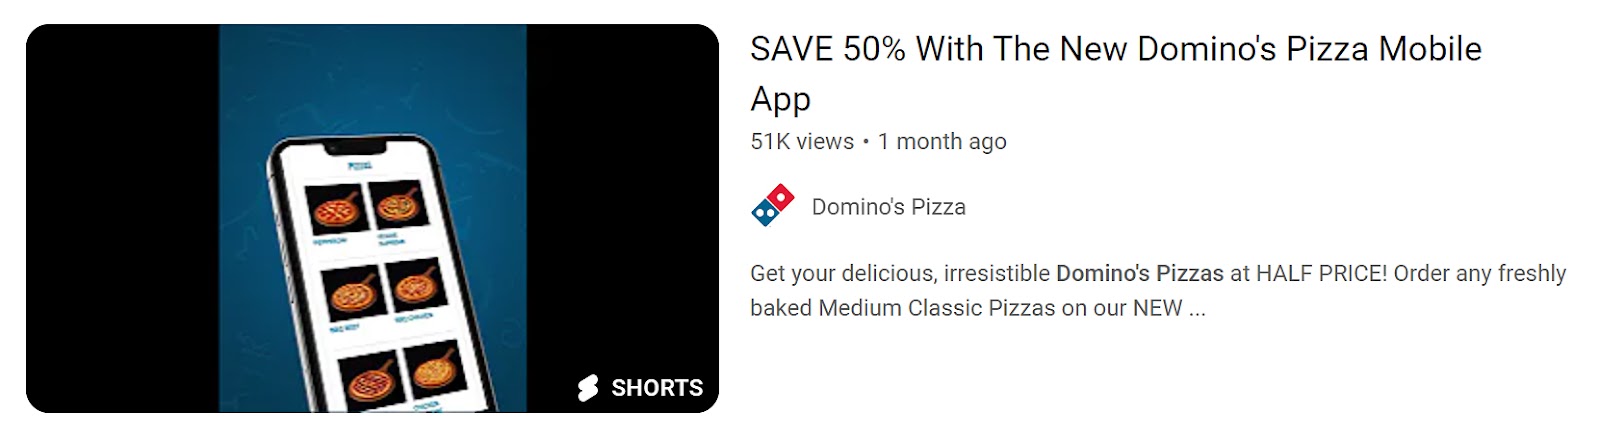 Domino’s Pizza mobile app promoted on YouTube